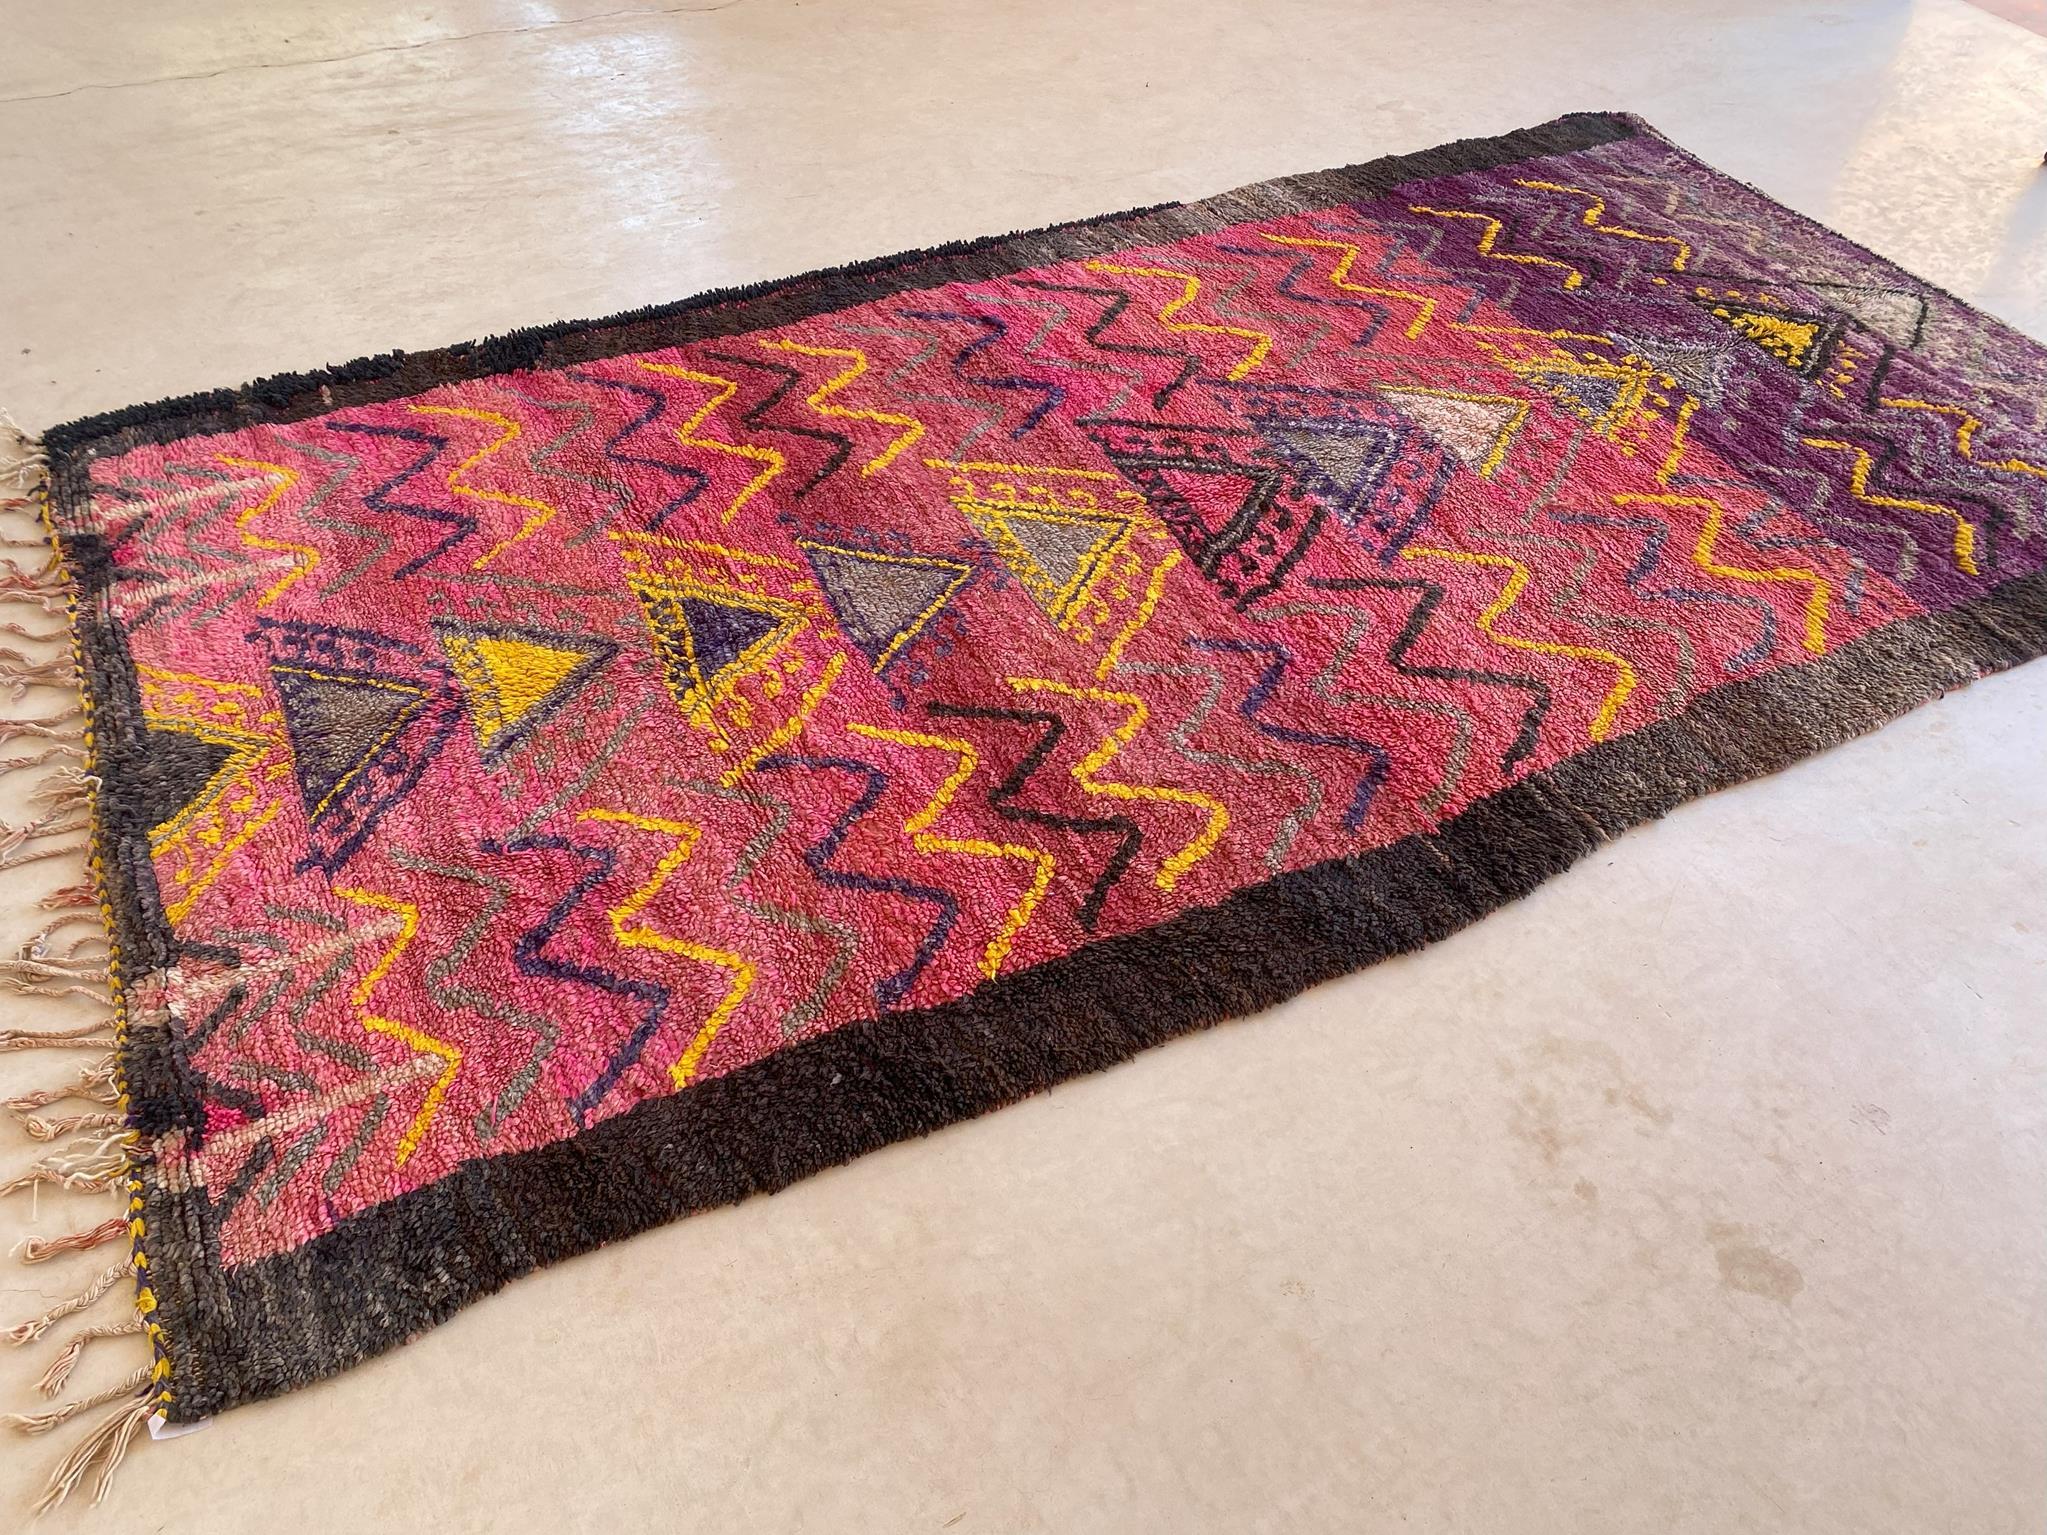 Hand-Woven Vintage Moroccan Boujad rug - Pink/purple/yellow - 6.8x12.7feet / 207x387cm For Sale